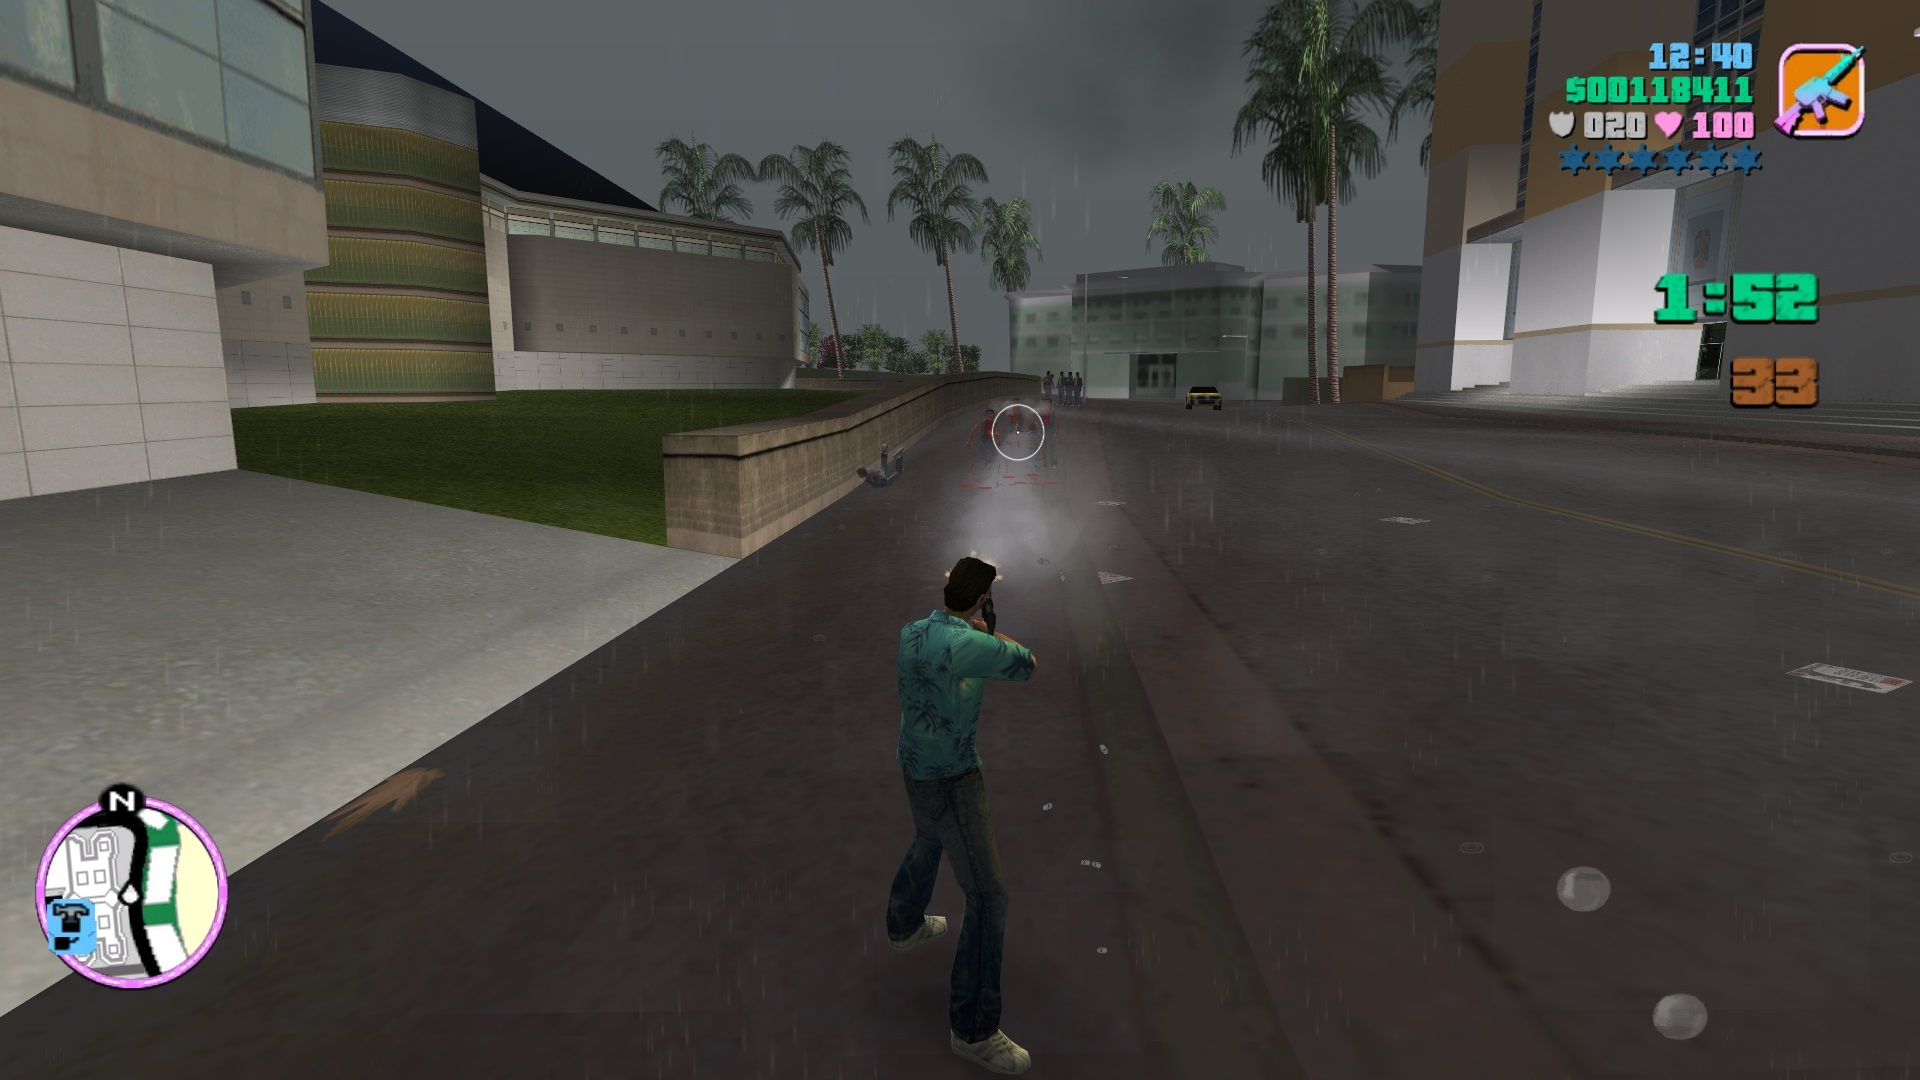 Gta san andreas resolution 1920x1080 patch notes